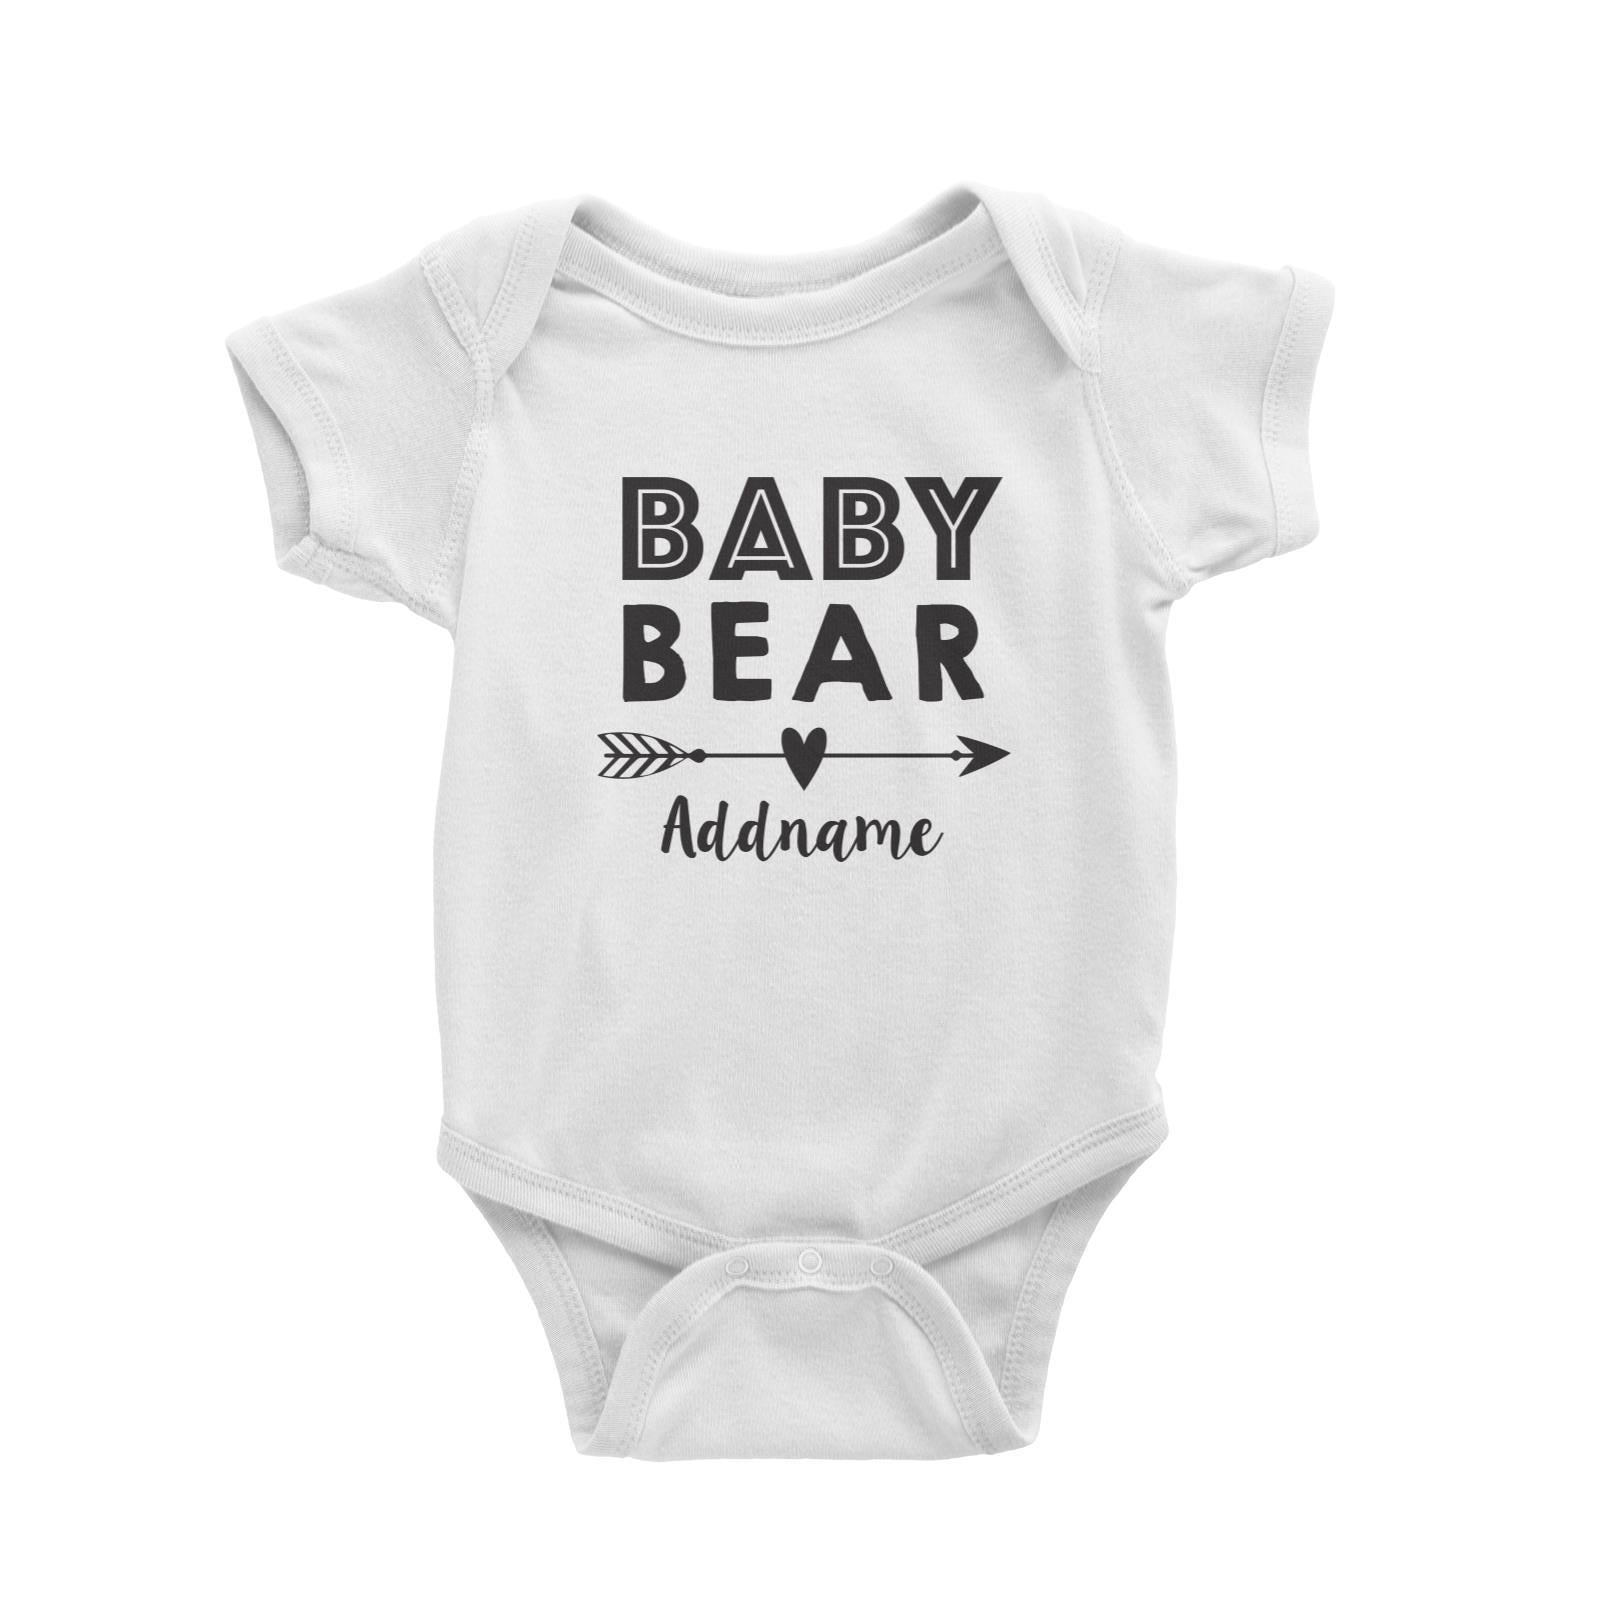 Baby Bear Addname Baby Romper  Matching Family Personalizable Designs